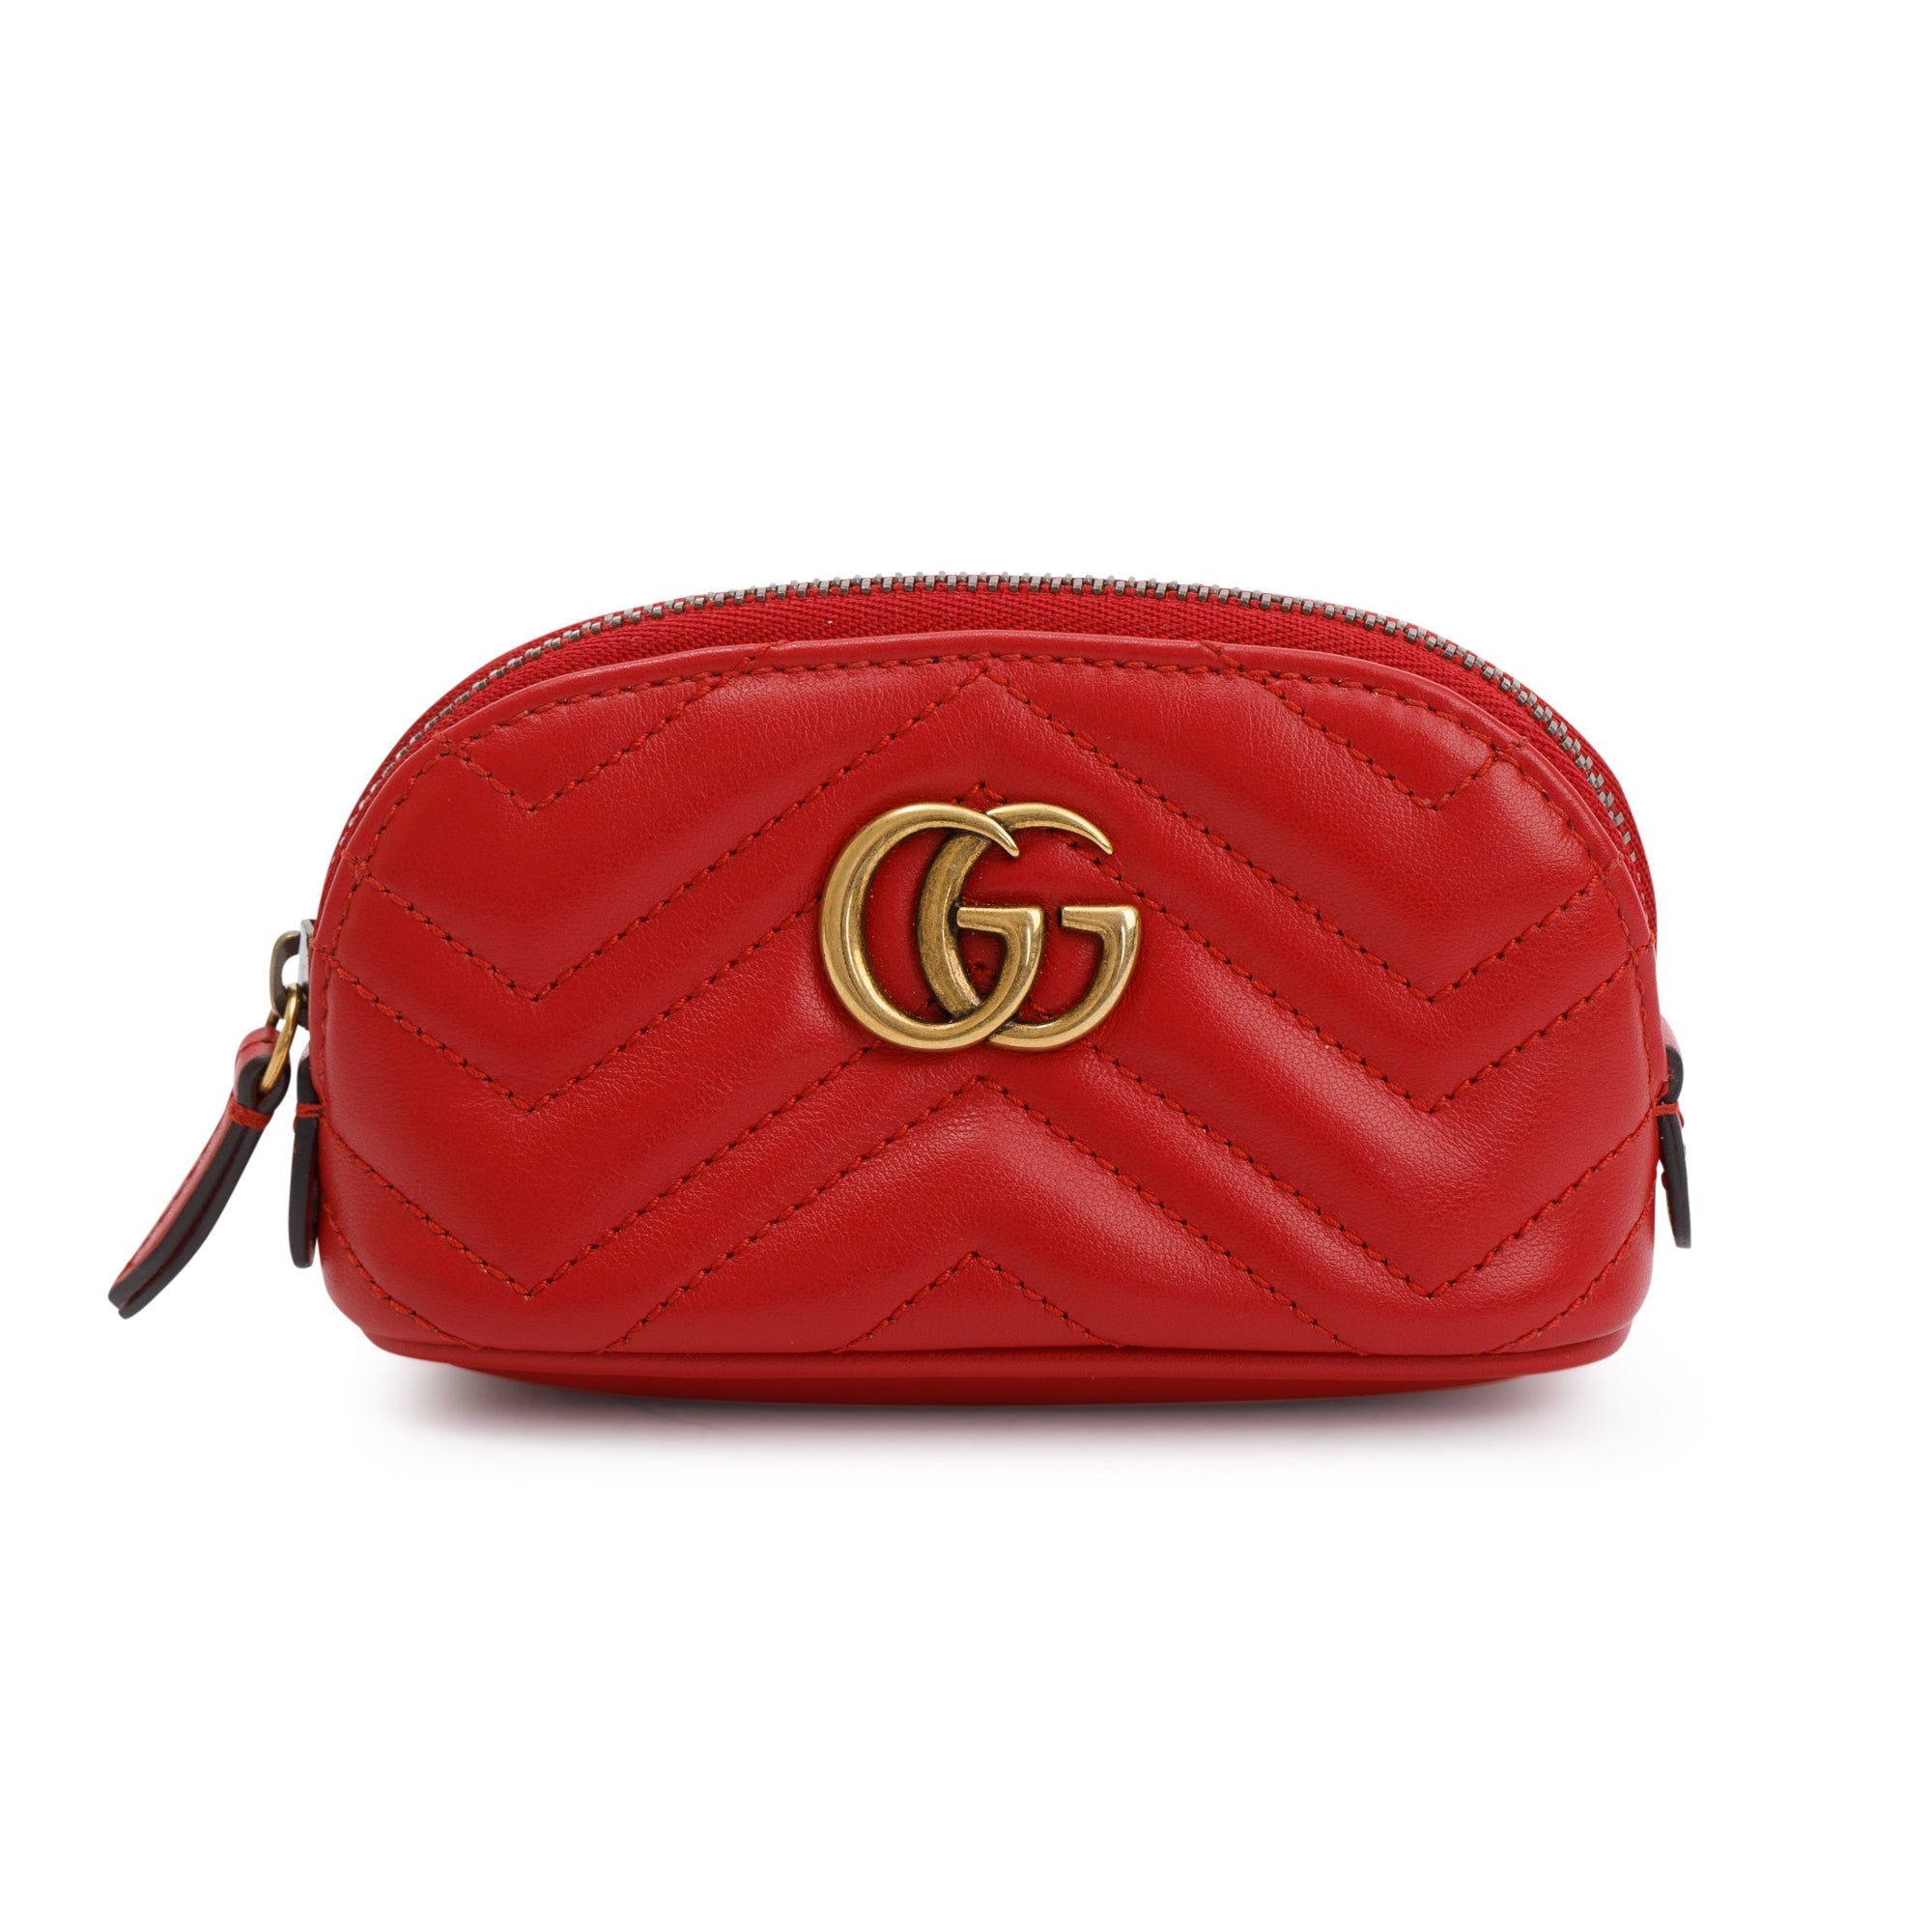 Gucci red golden face organ bag trumpet💖 | Gallery posted by Peil | Lemon8